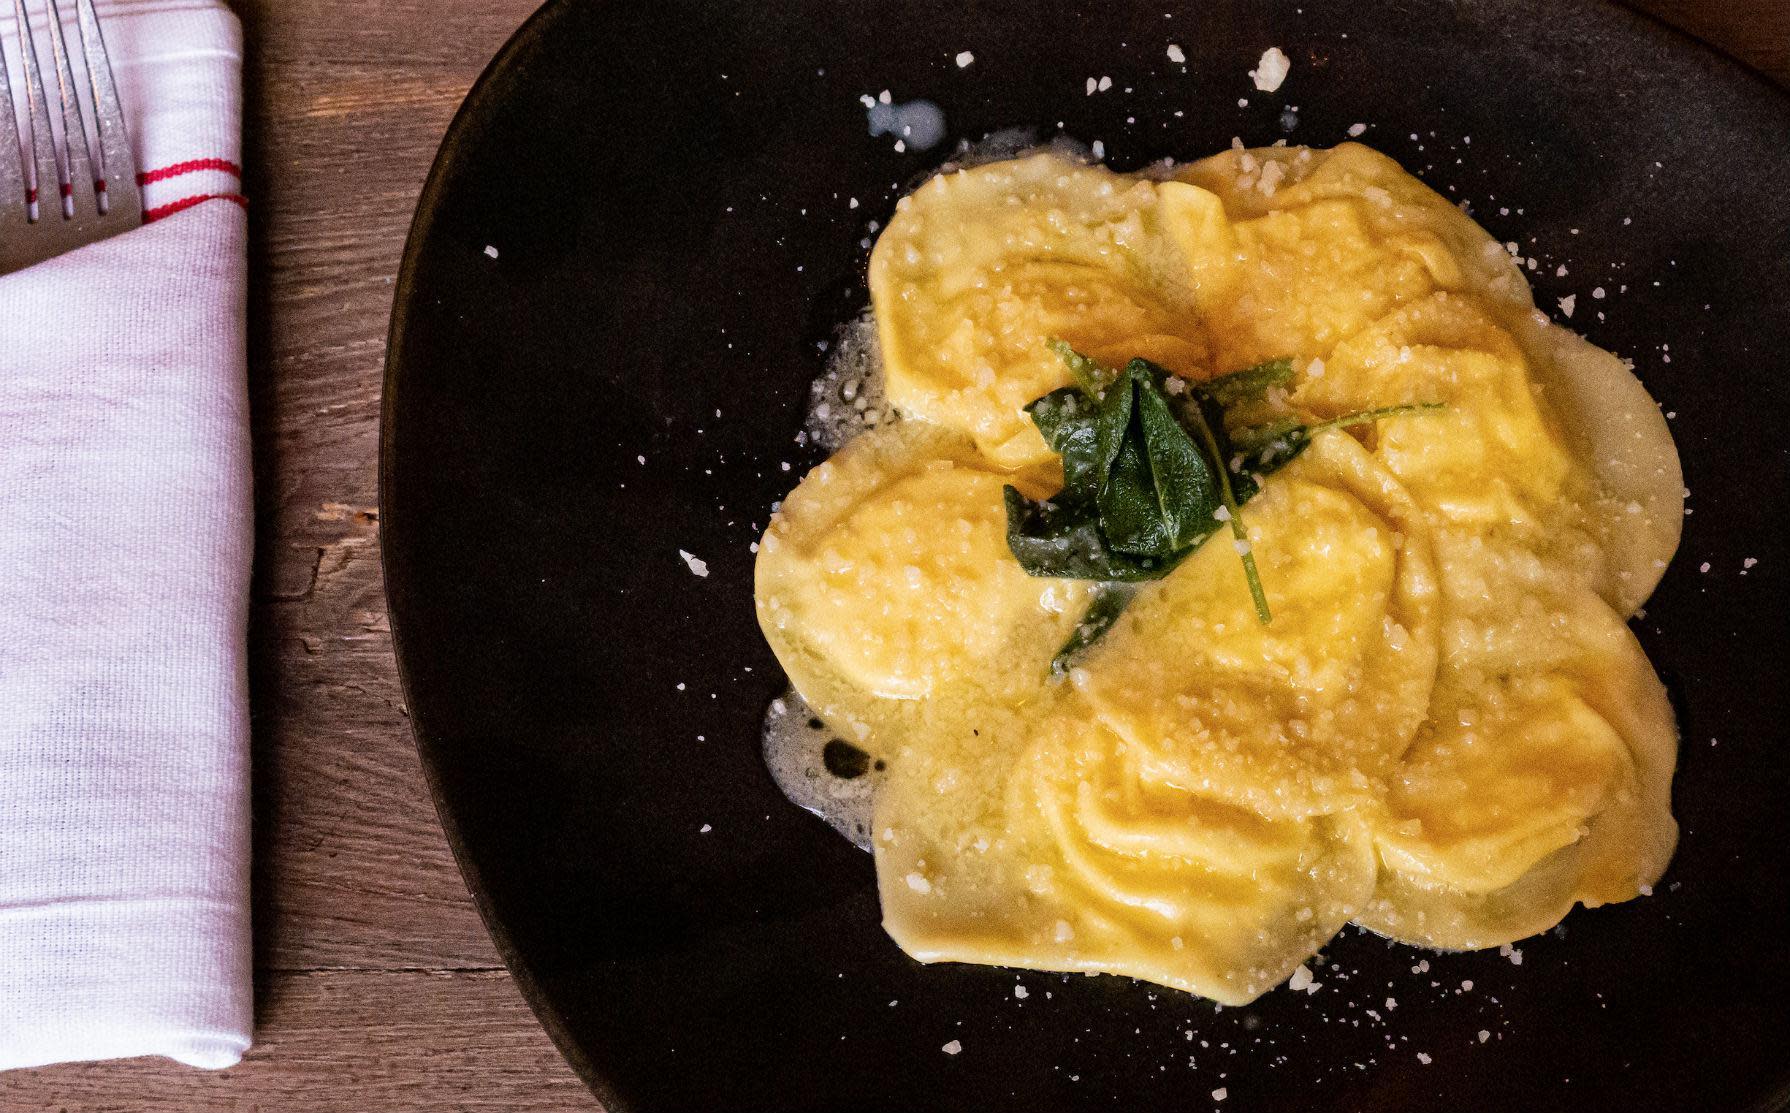 The secret to making truly authentic ravioli, according to an Italian chef